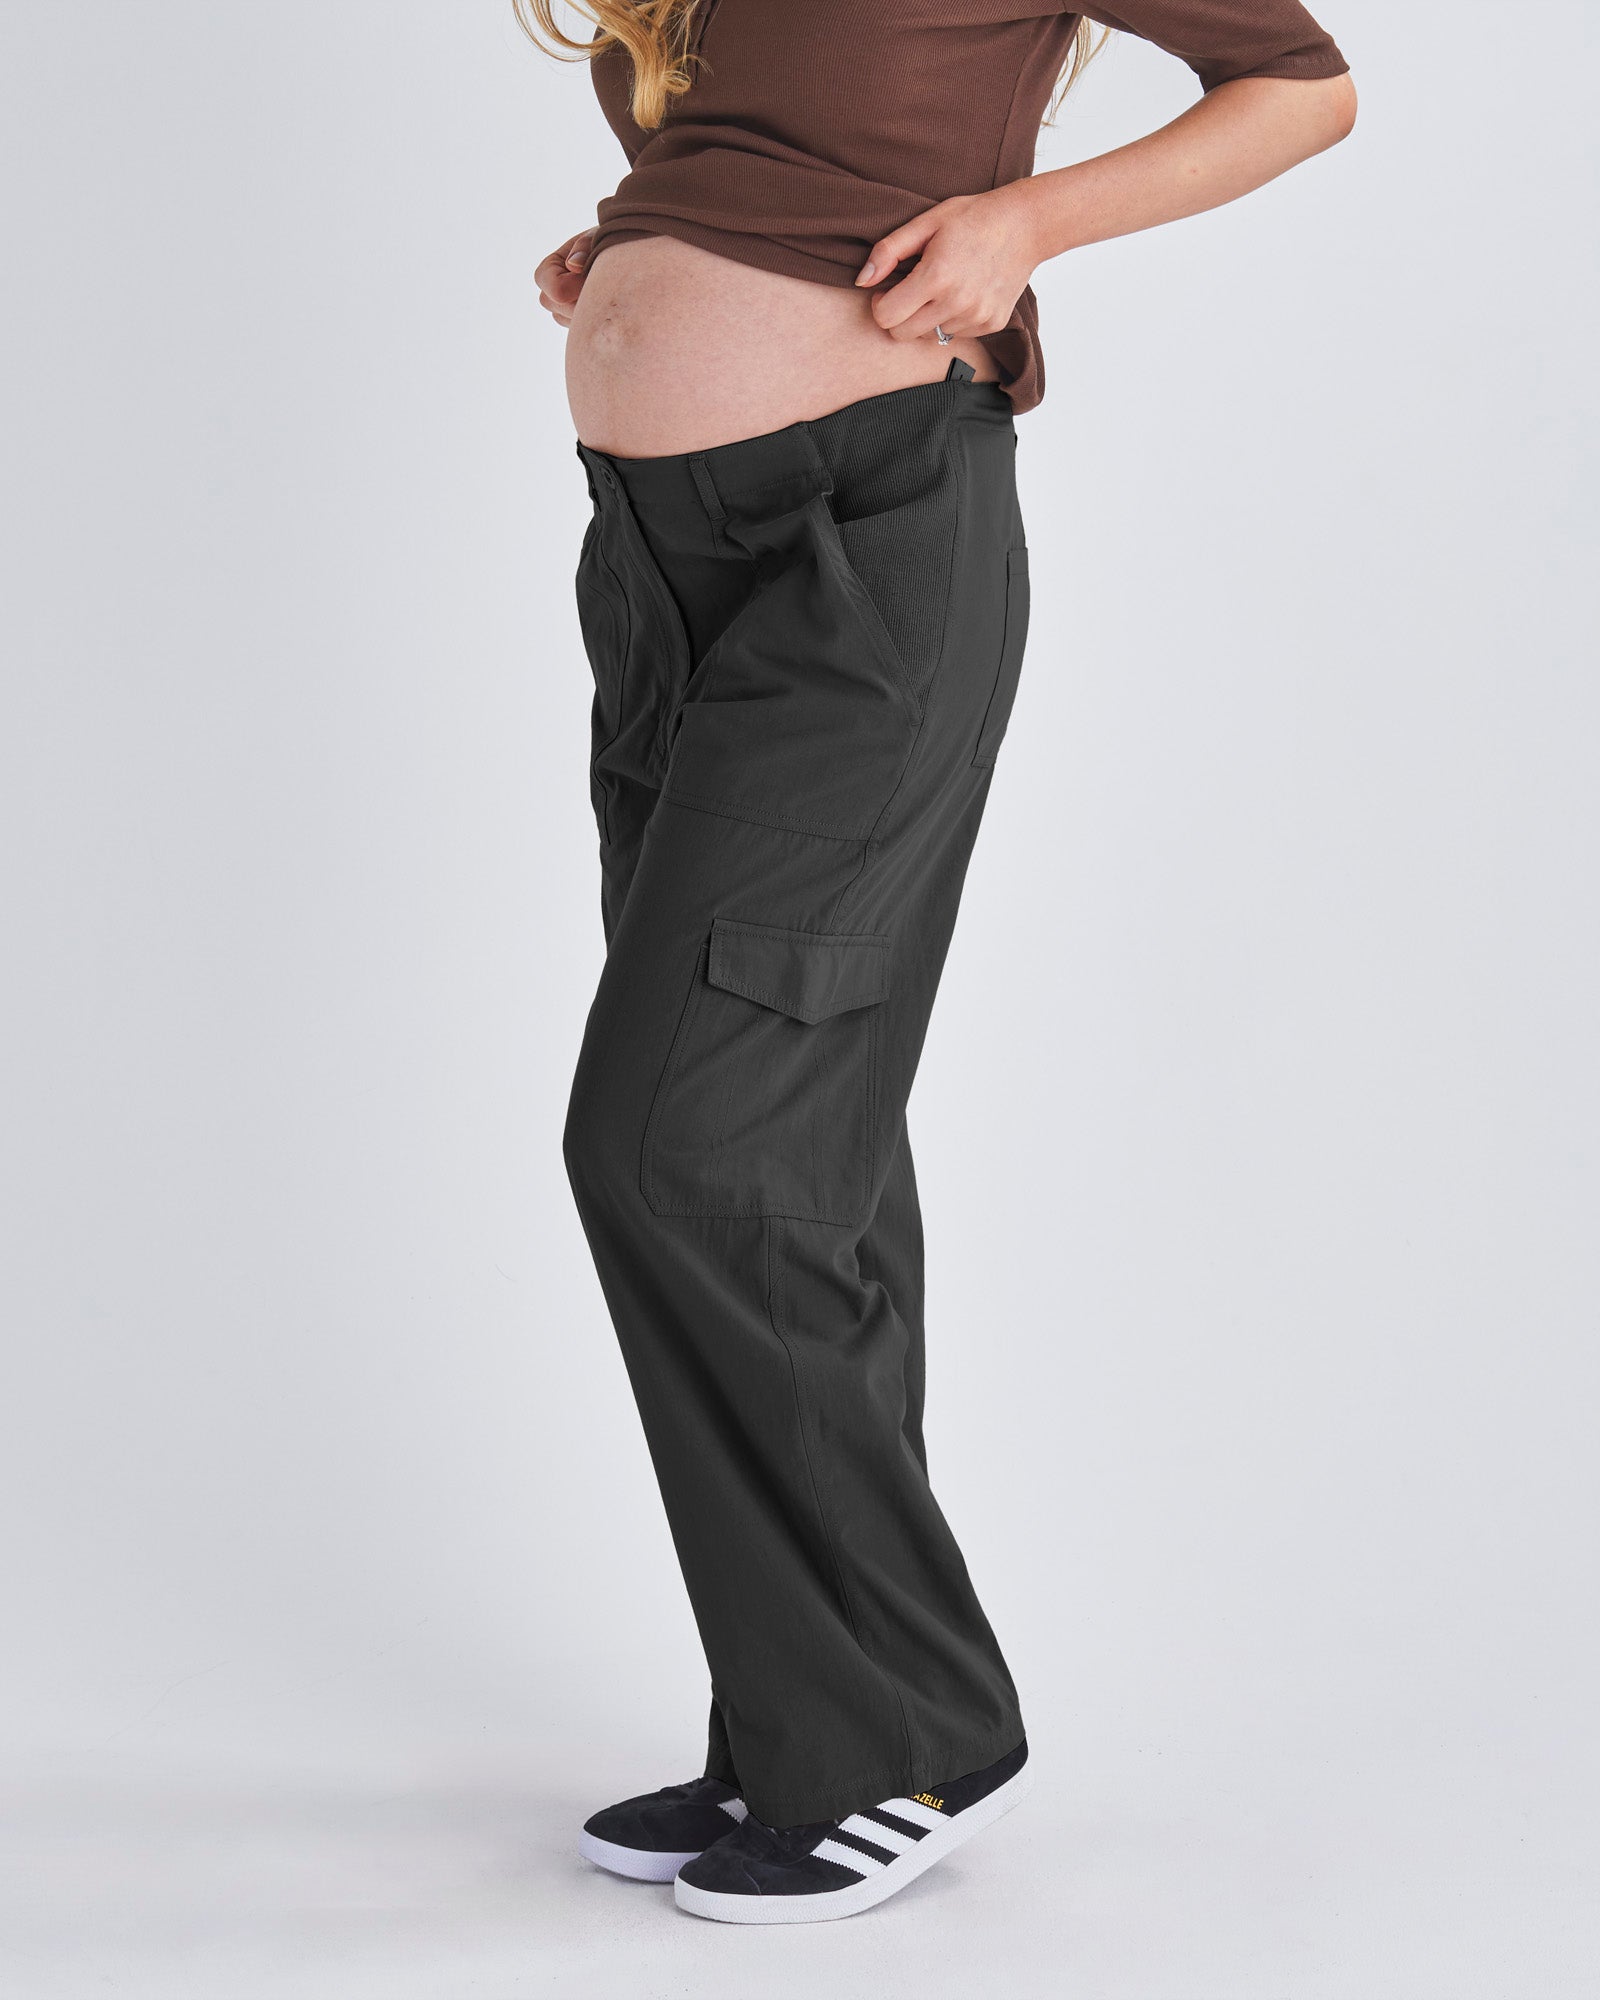 Maternity Pants Australia: Discover Comfort, Style & Support